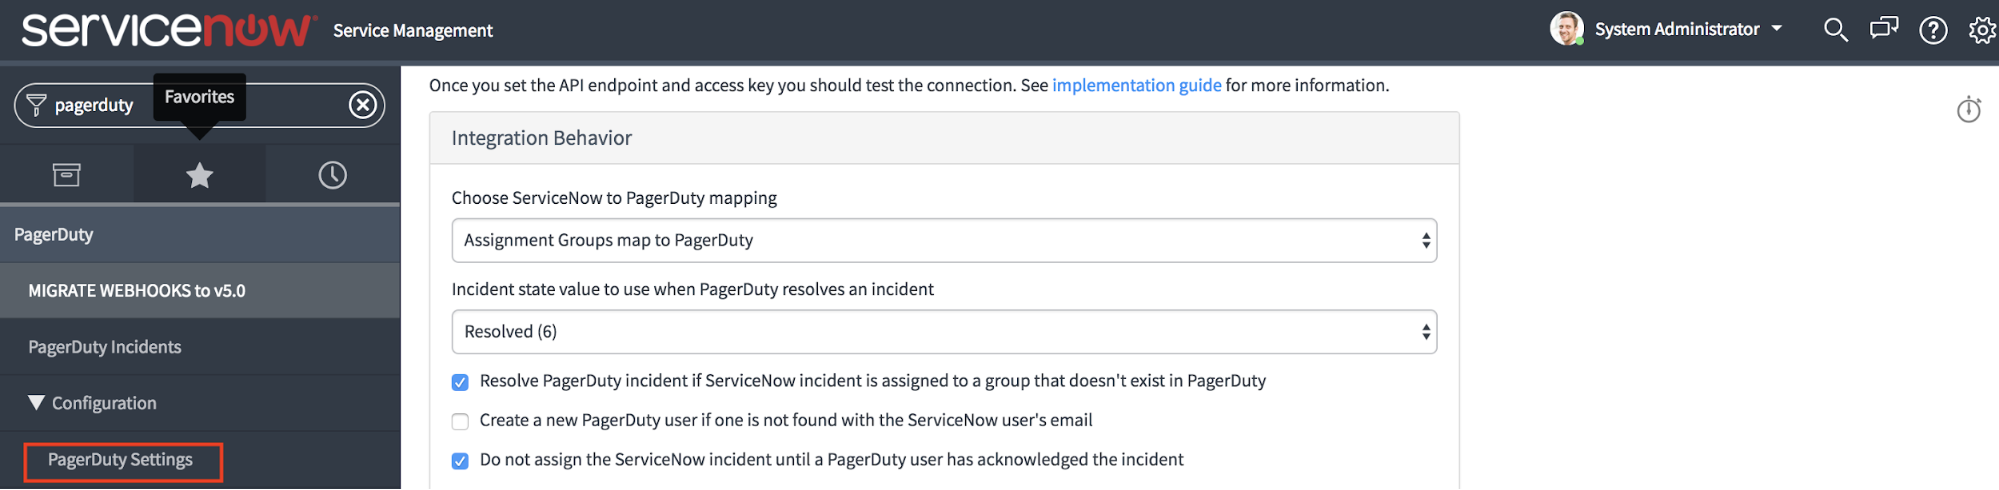 Configure the PagerDuty settings page in ServiceNow